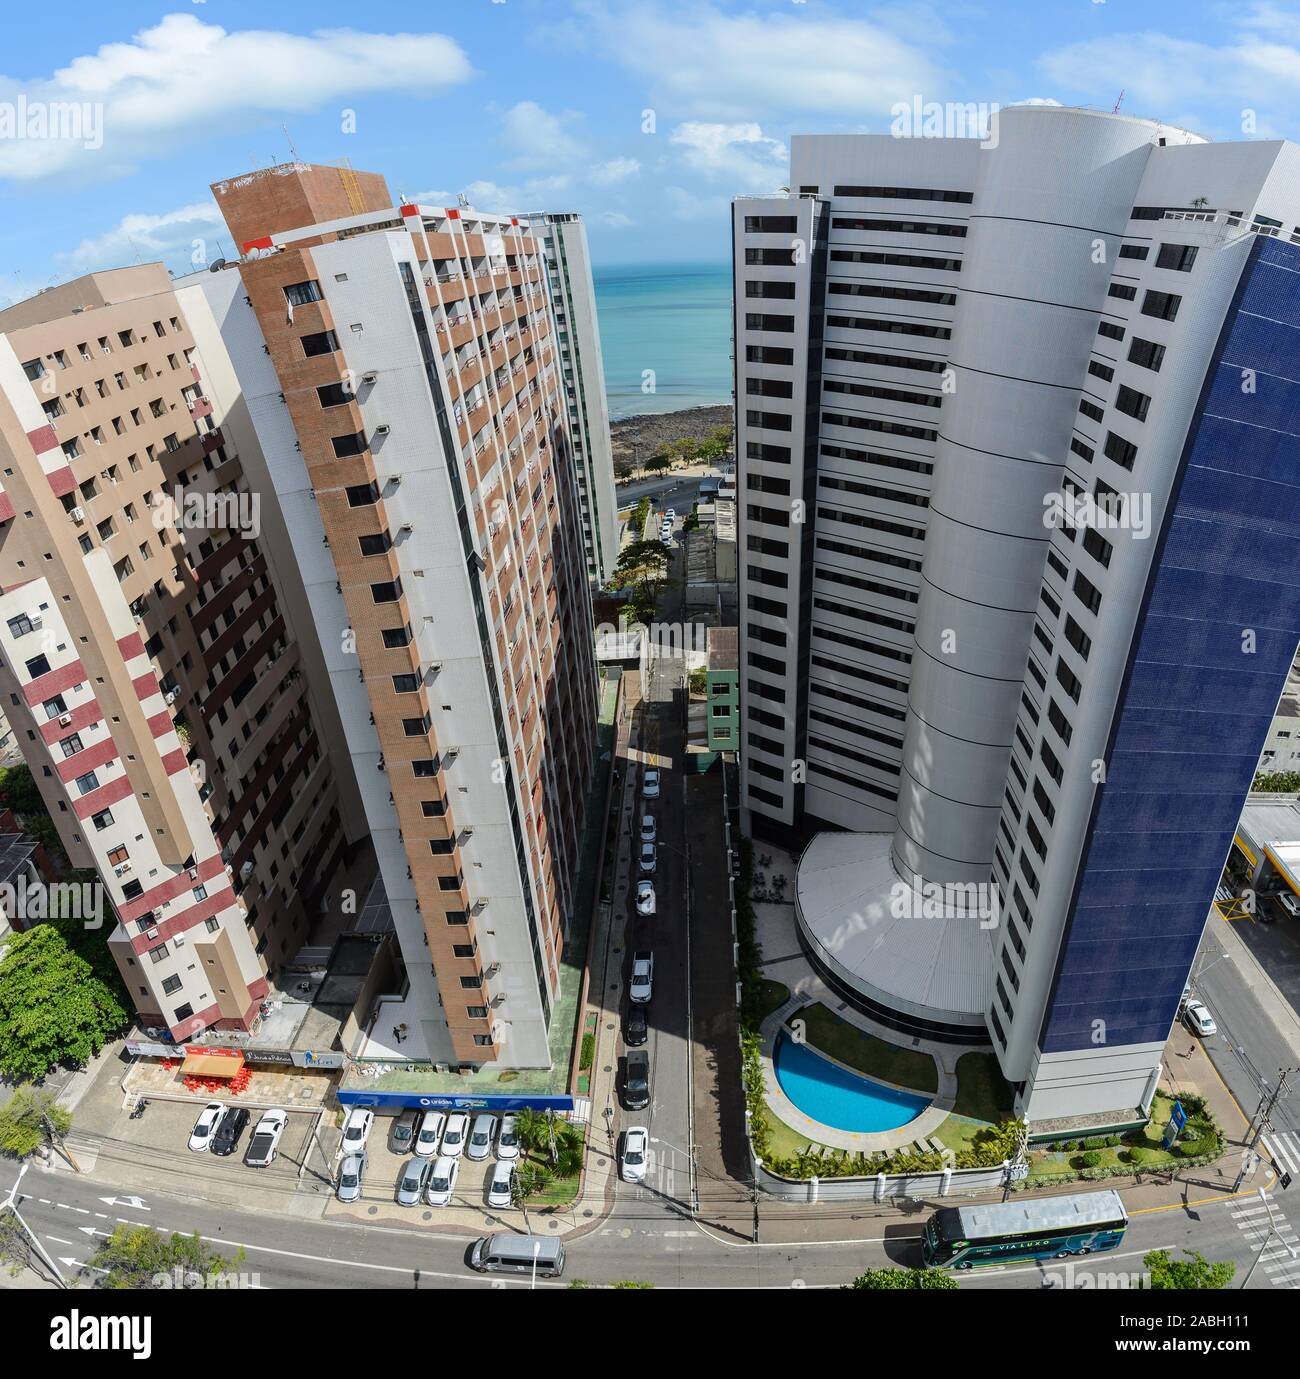 Highrise buildings in Fortaleza, Ceara, Brazil, South America. Stock Photo